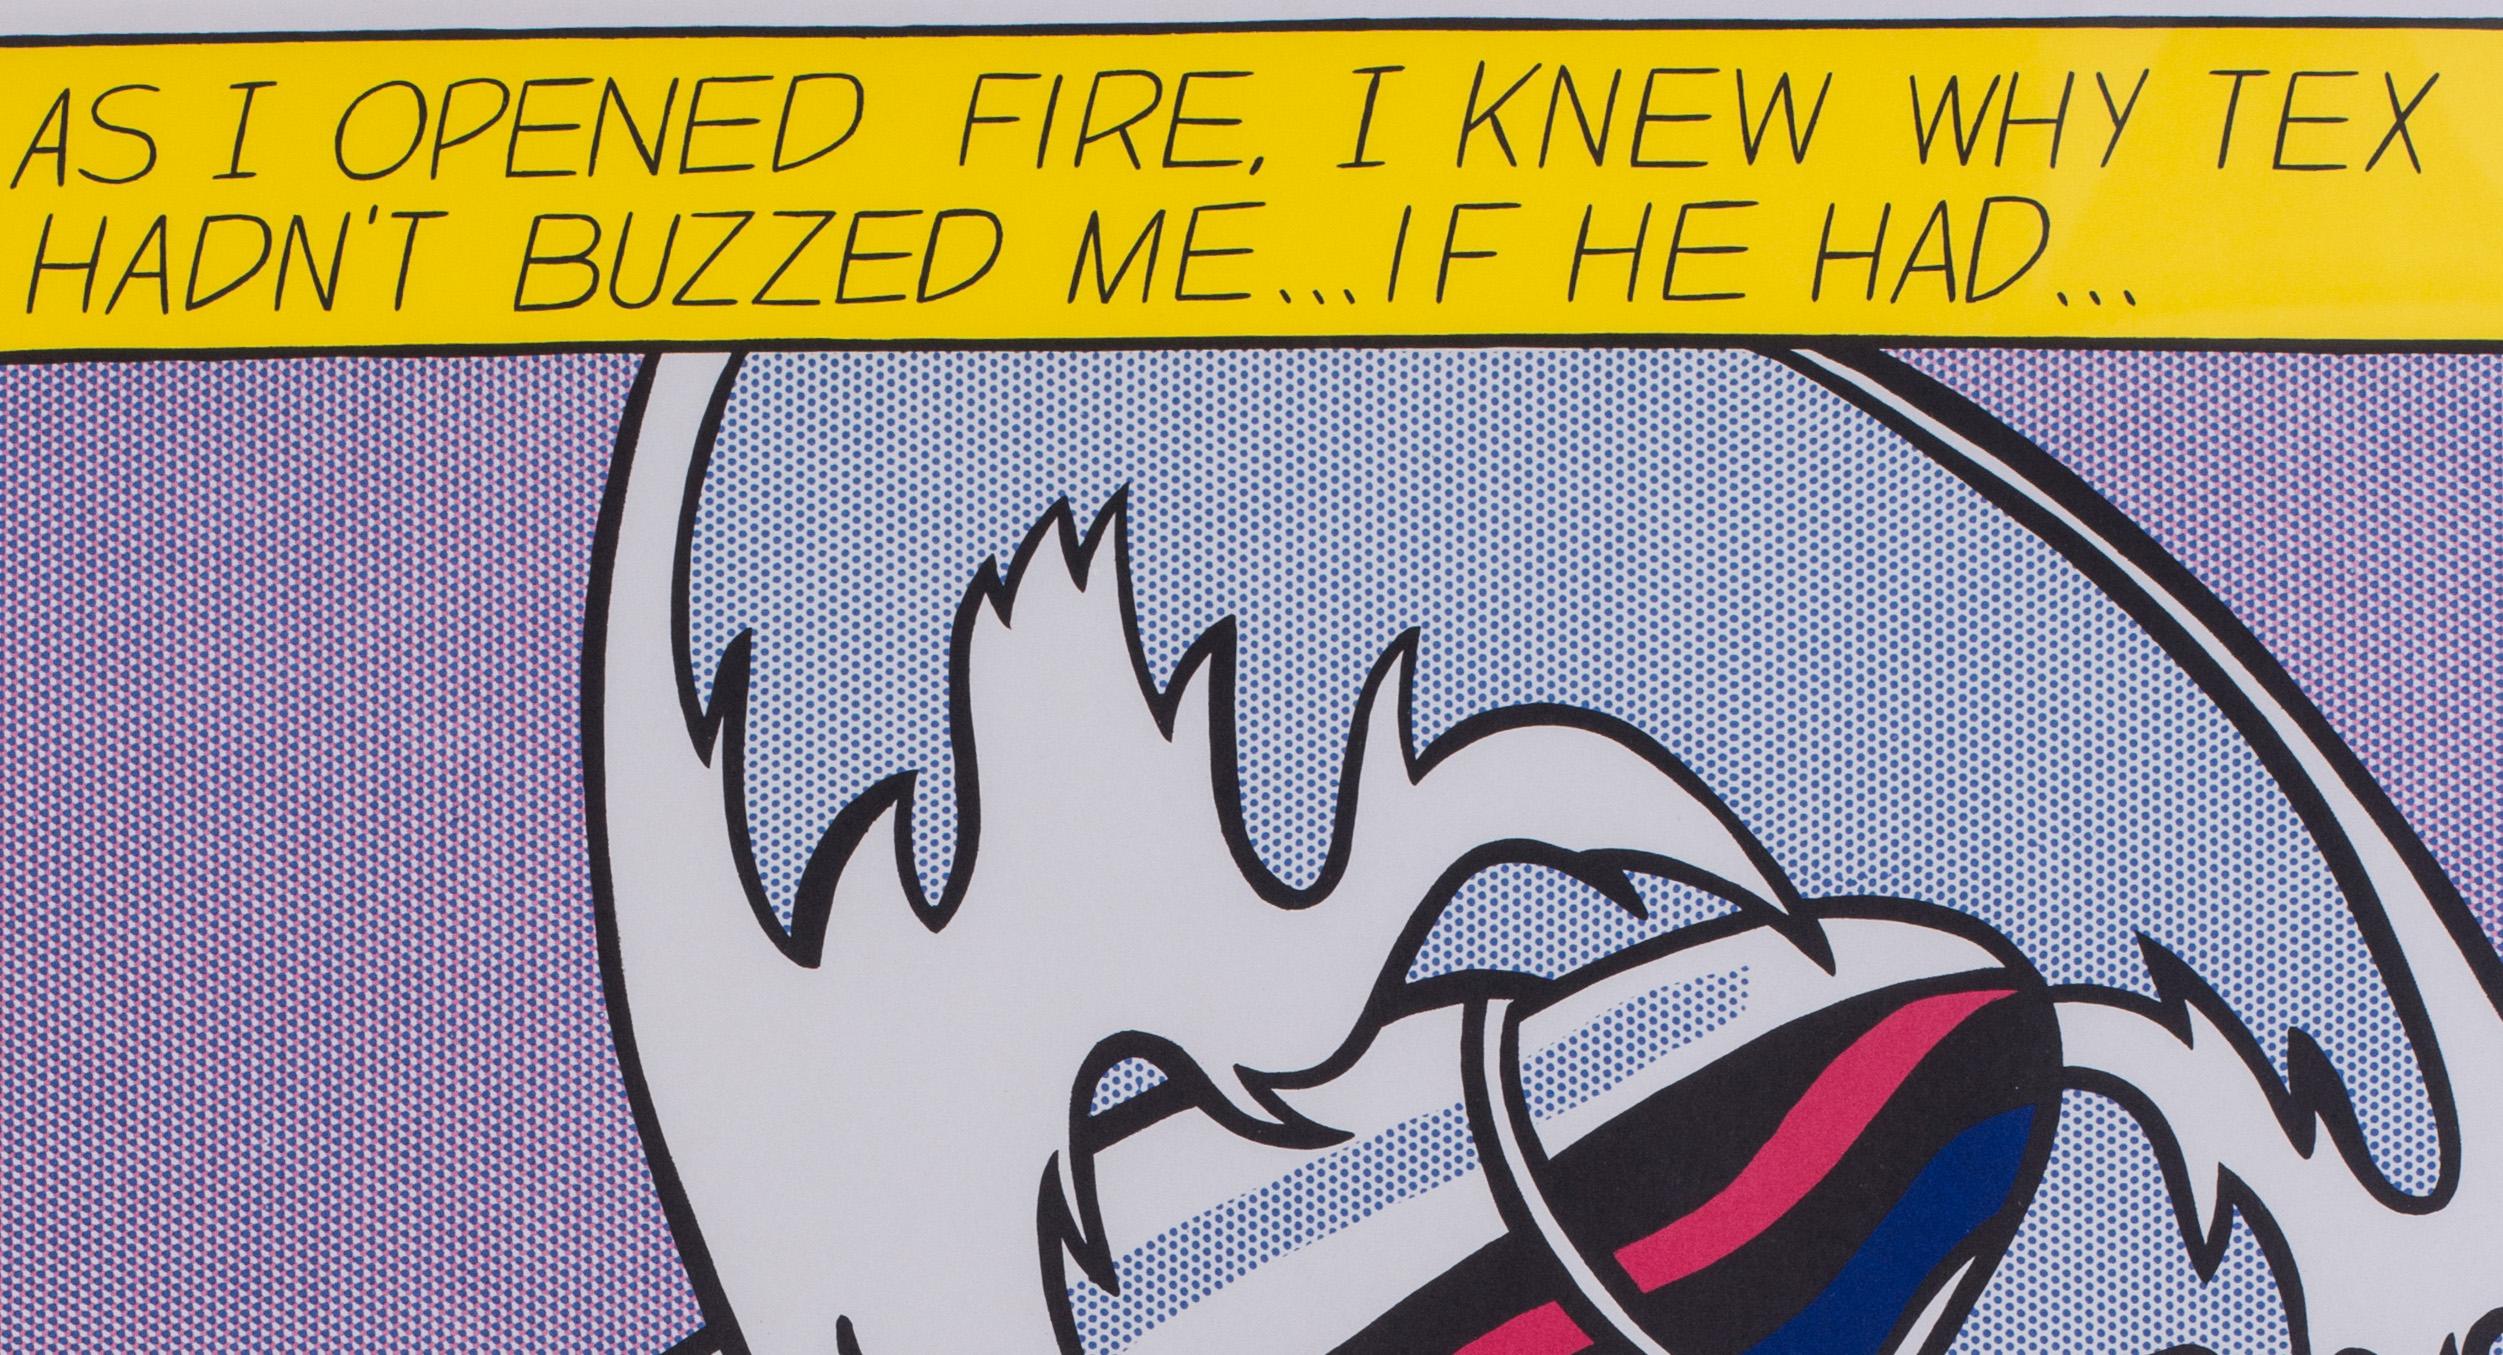 Roy Lichtenstein (American, 1923 – 1997)

As I opened fire

One signed ‘R. Lichtenstein’ (lower right, in pencil)
Offset lithograph on wove paper 
An edition of 3 parts from the Stedelijk Museum, Amsterdam.  
Each sheet measures 25 x 21 in. (63.5 x